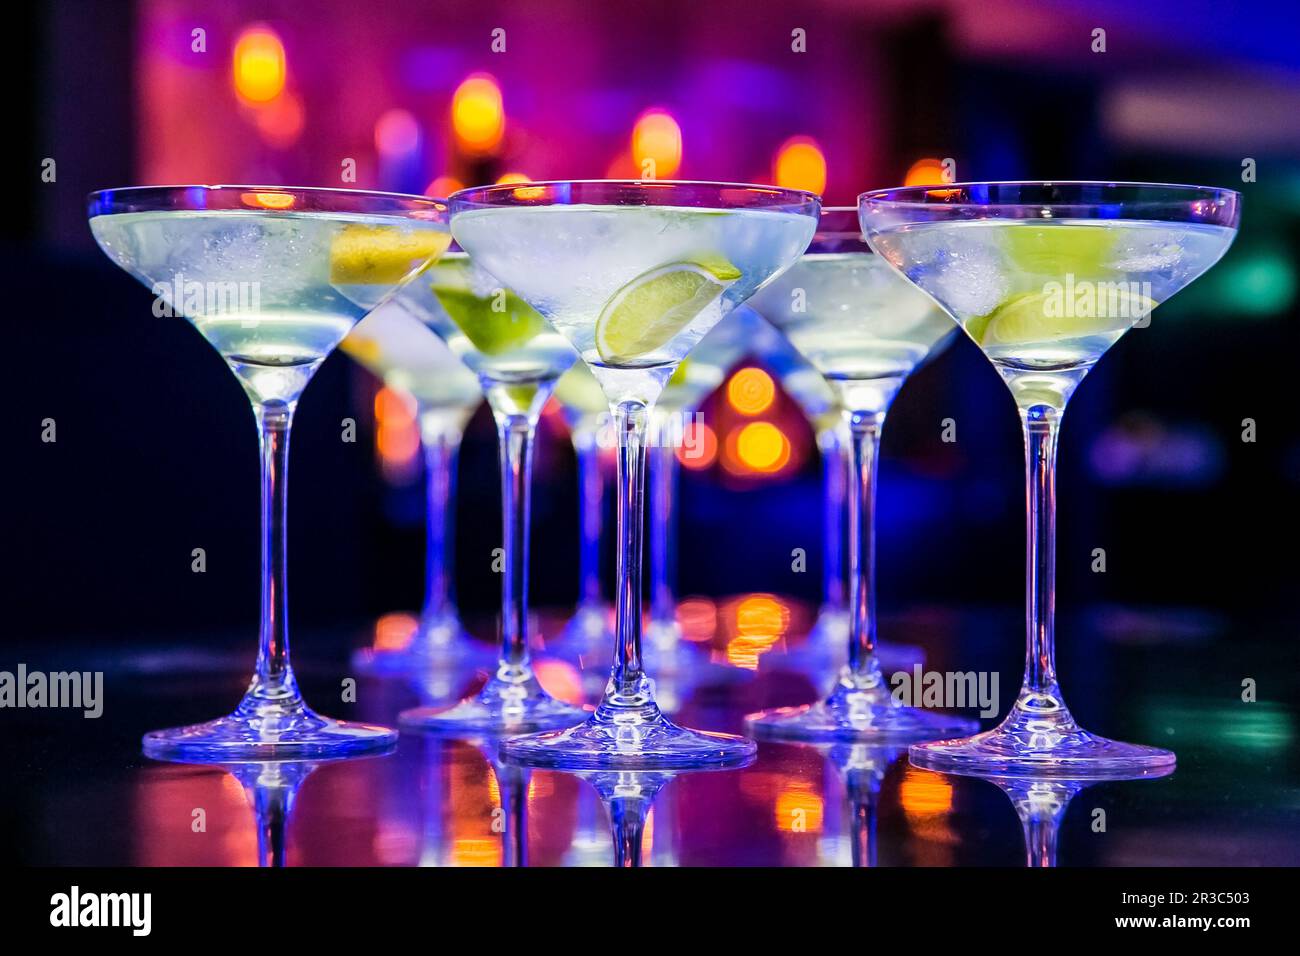 New Year Drinks for Gala Dinner or Cocktail Party Event Stock Photo